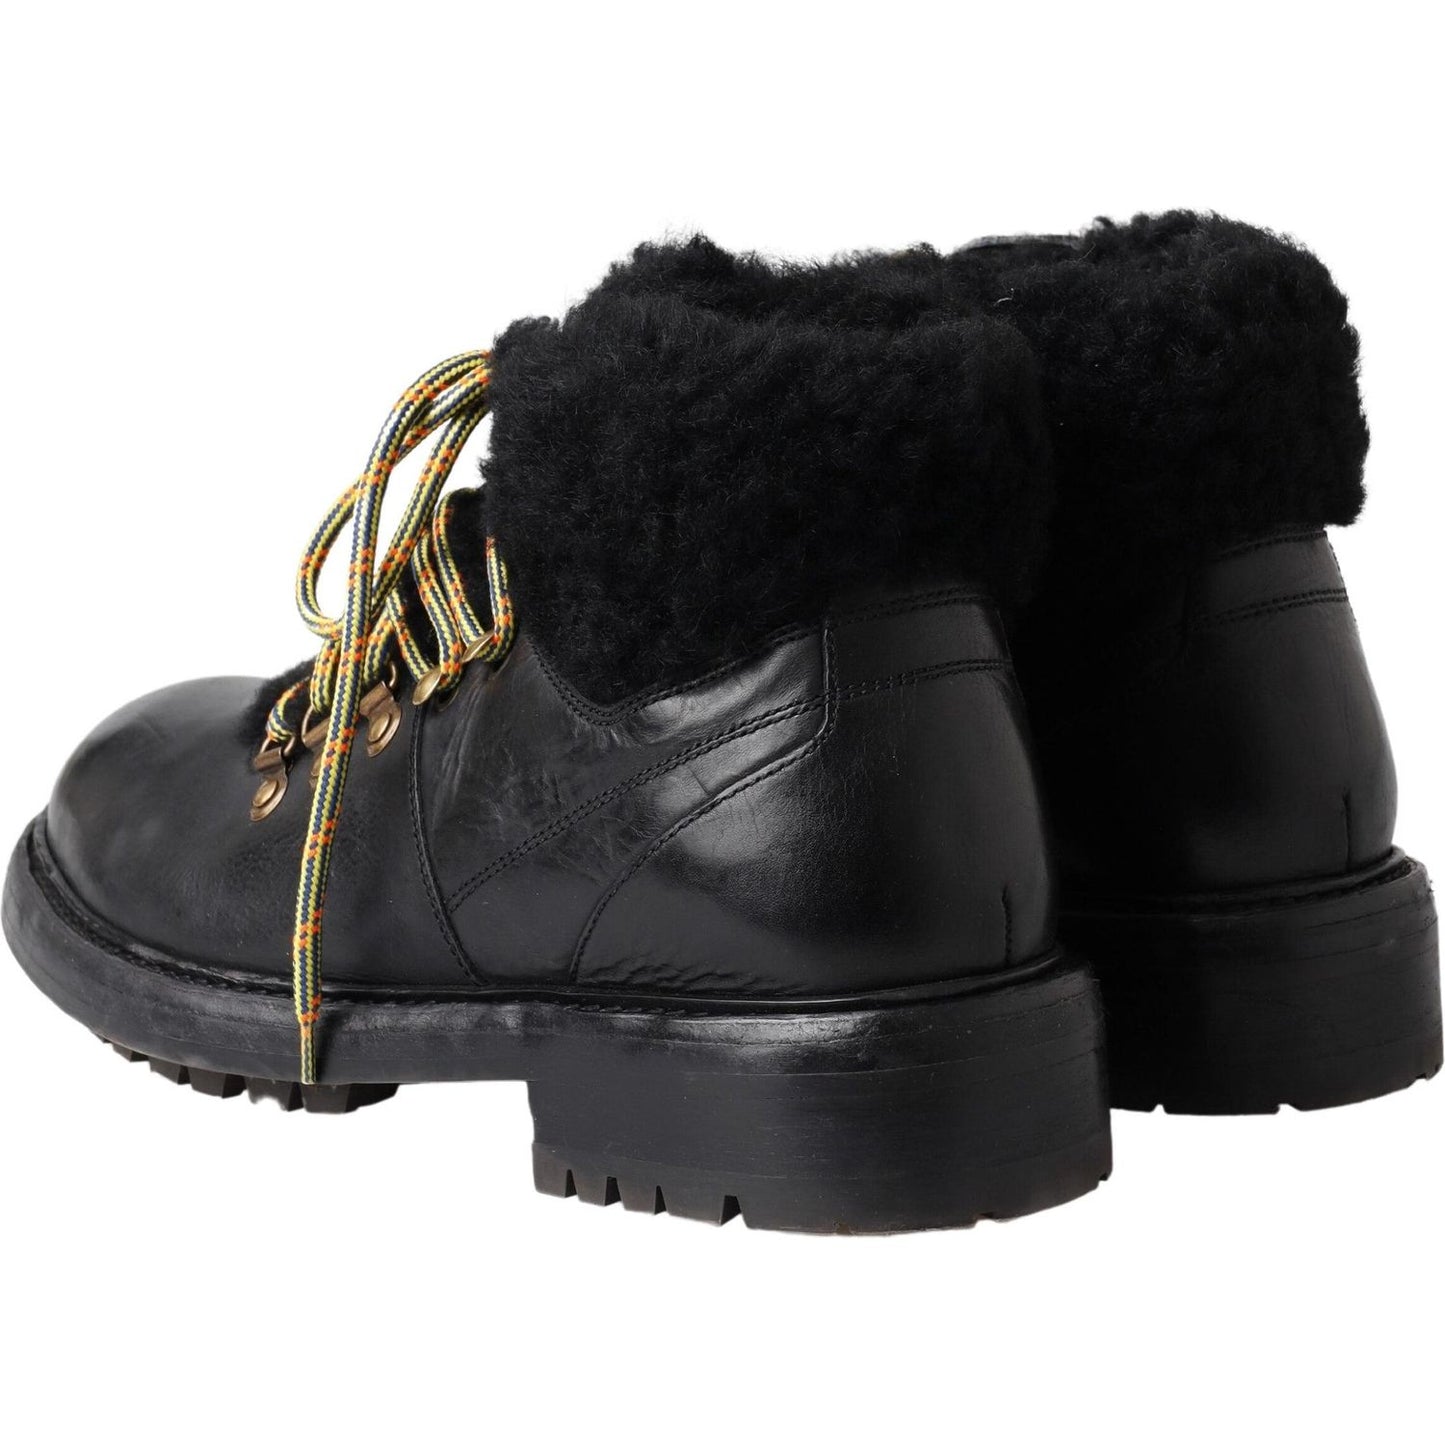 Dolce & Gabbana Elegant Shearling Style Men's Leather Boots black-leather-bernini-shearling-boots-shoes